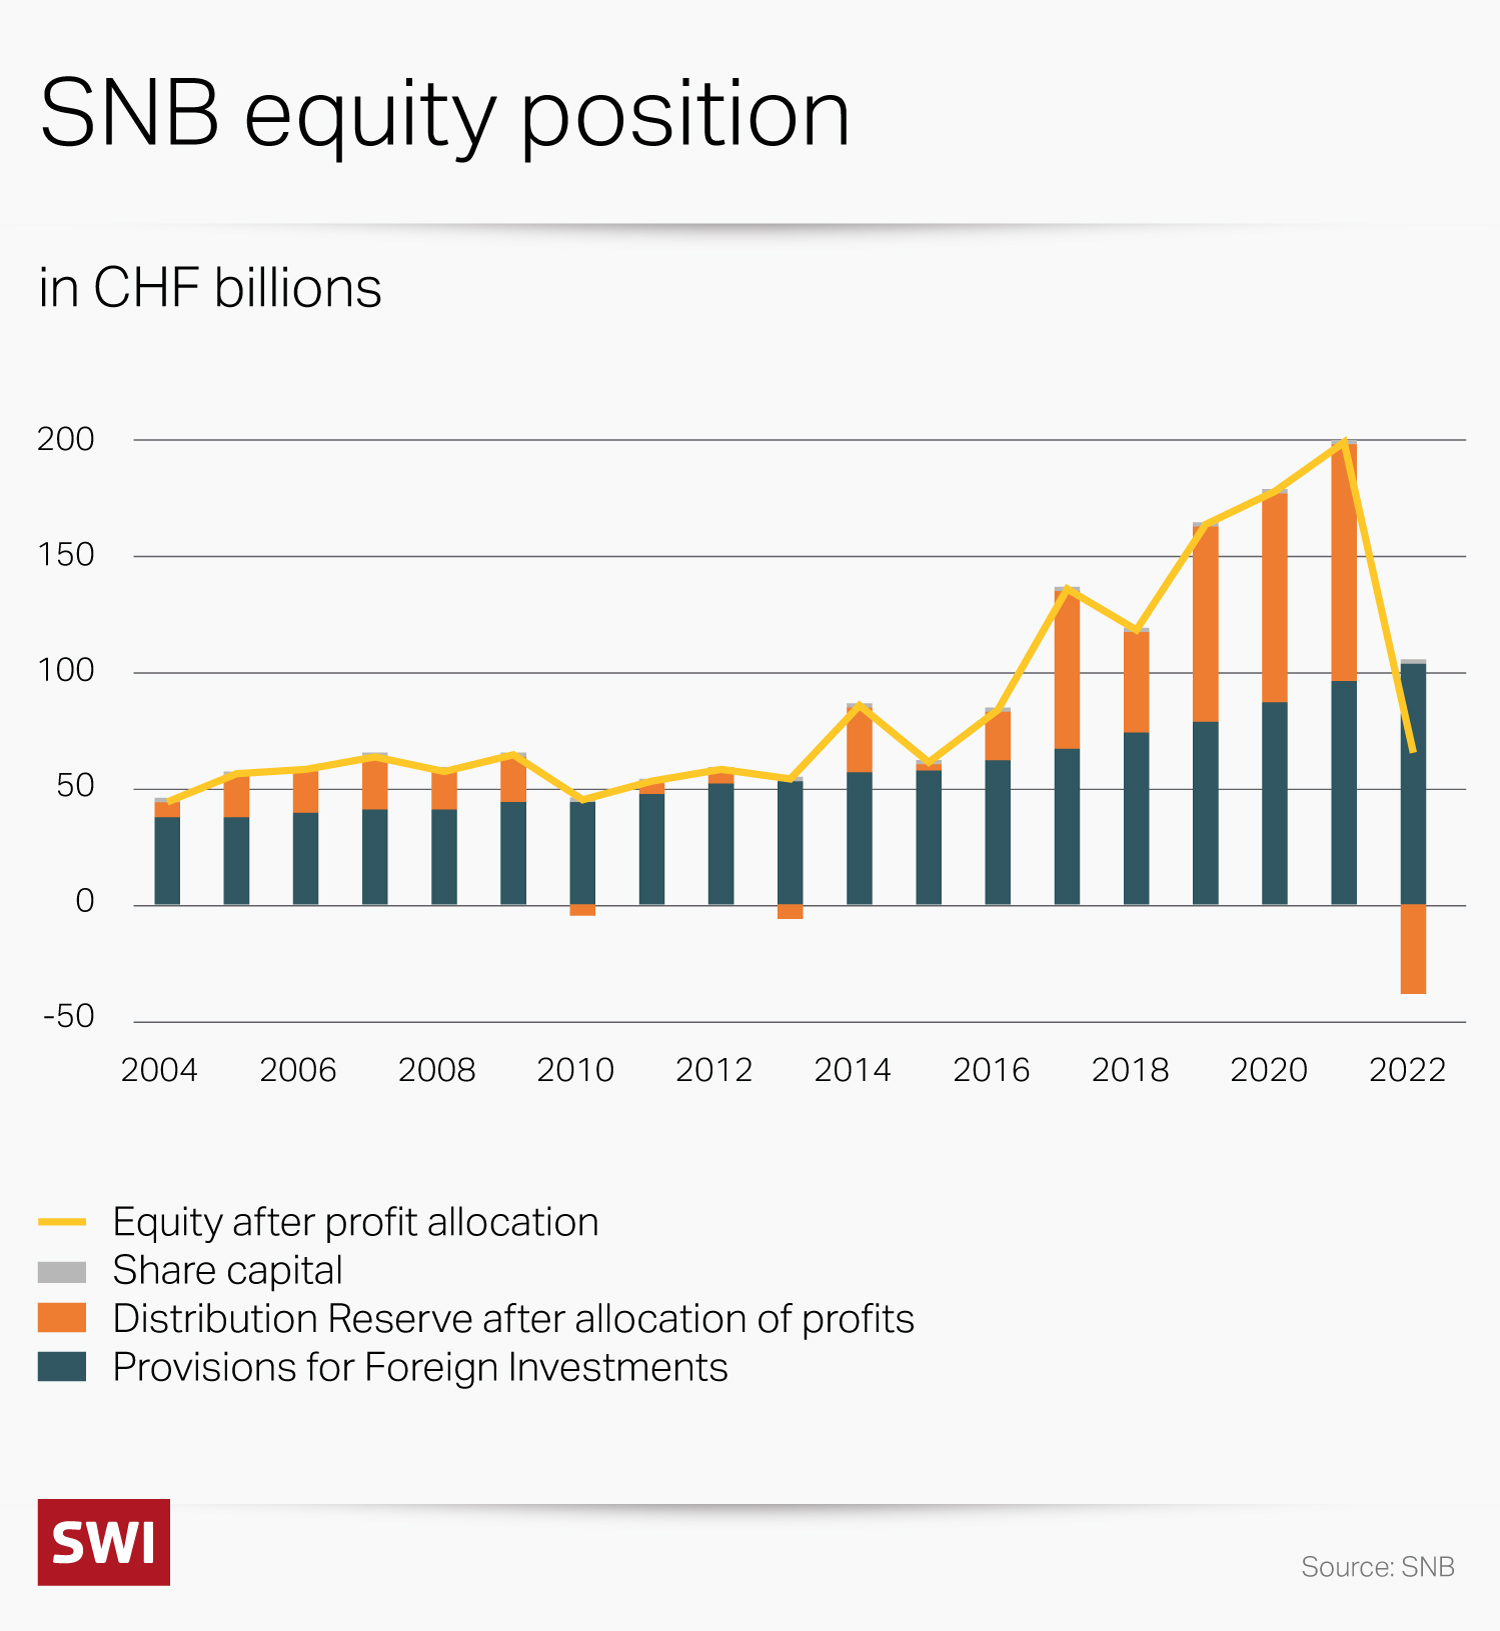 Graph showing SNB equioty position